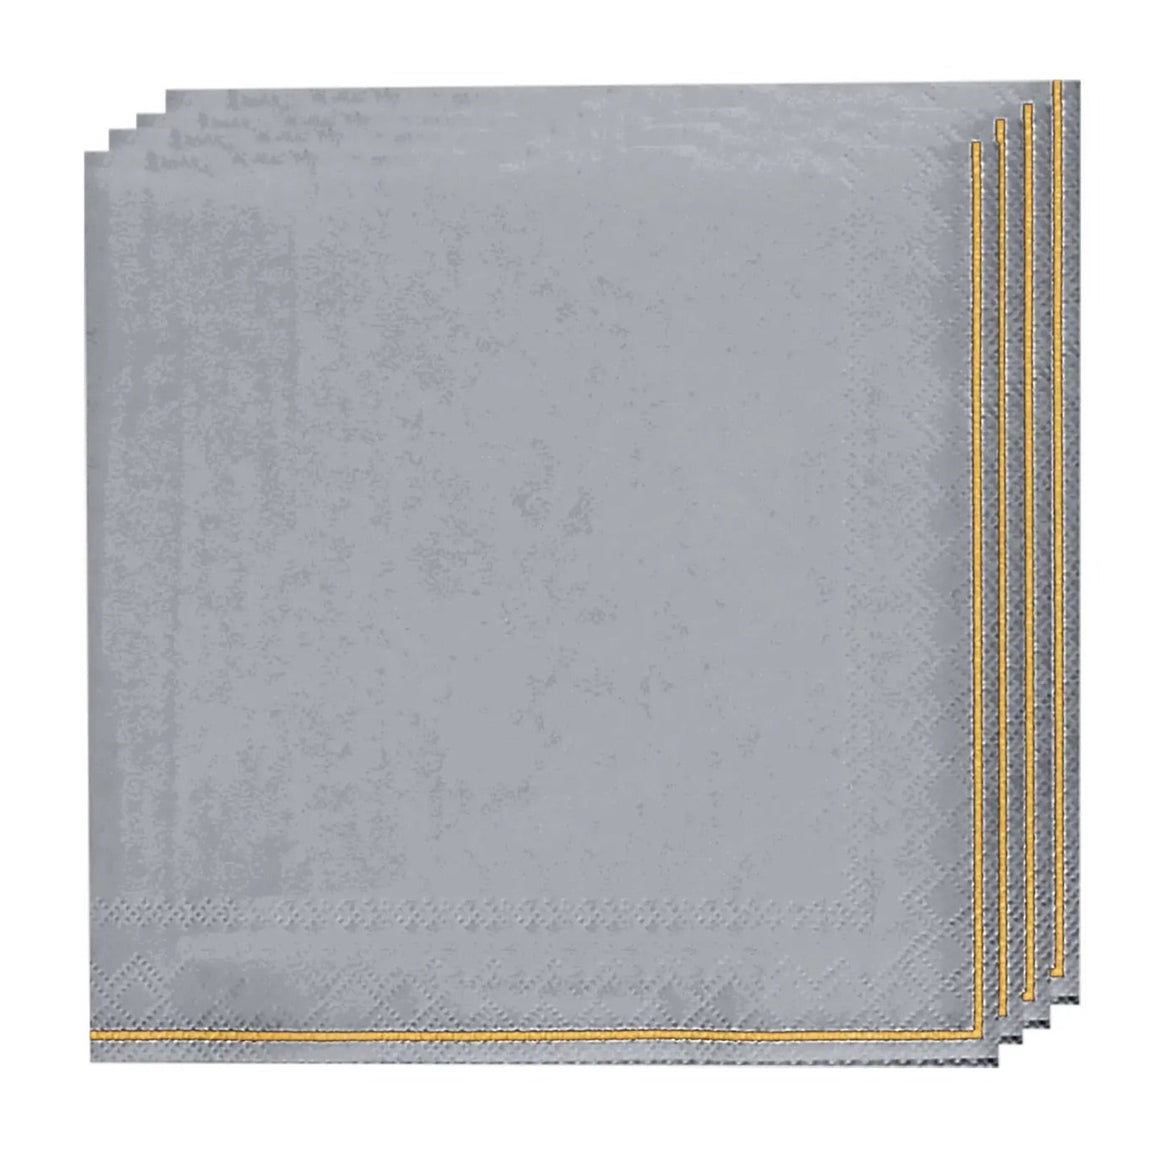 NAPKINS - LARGE GREY WITH GOLD STRIPE